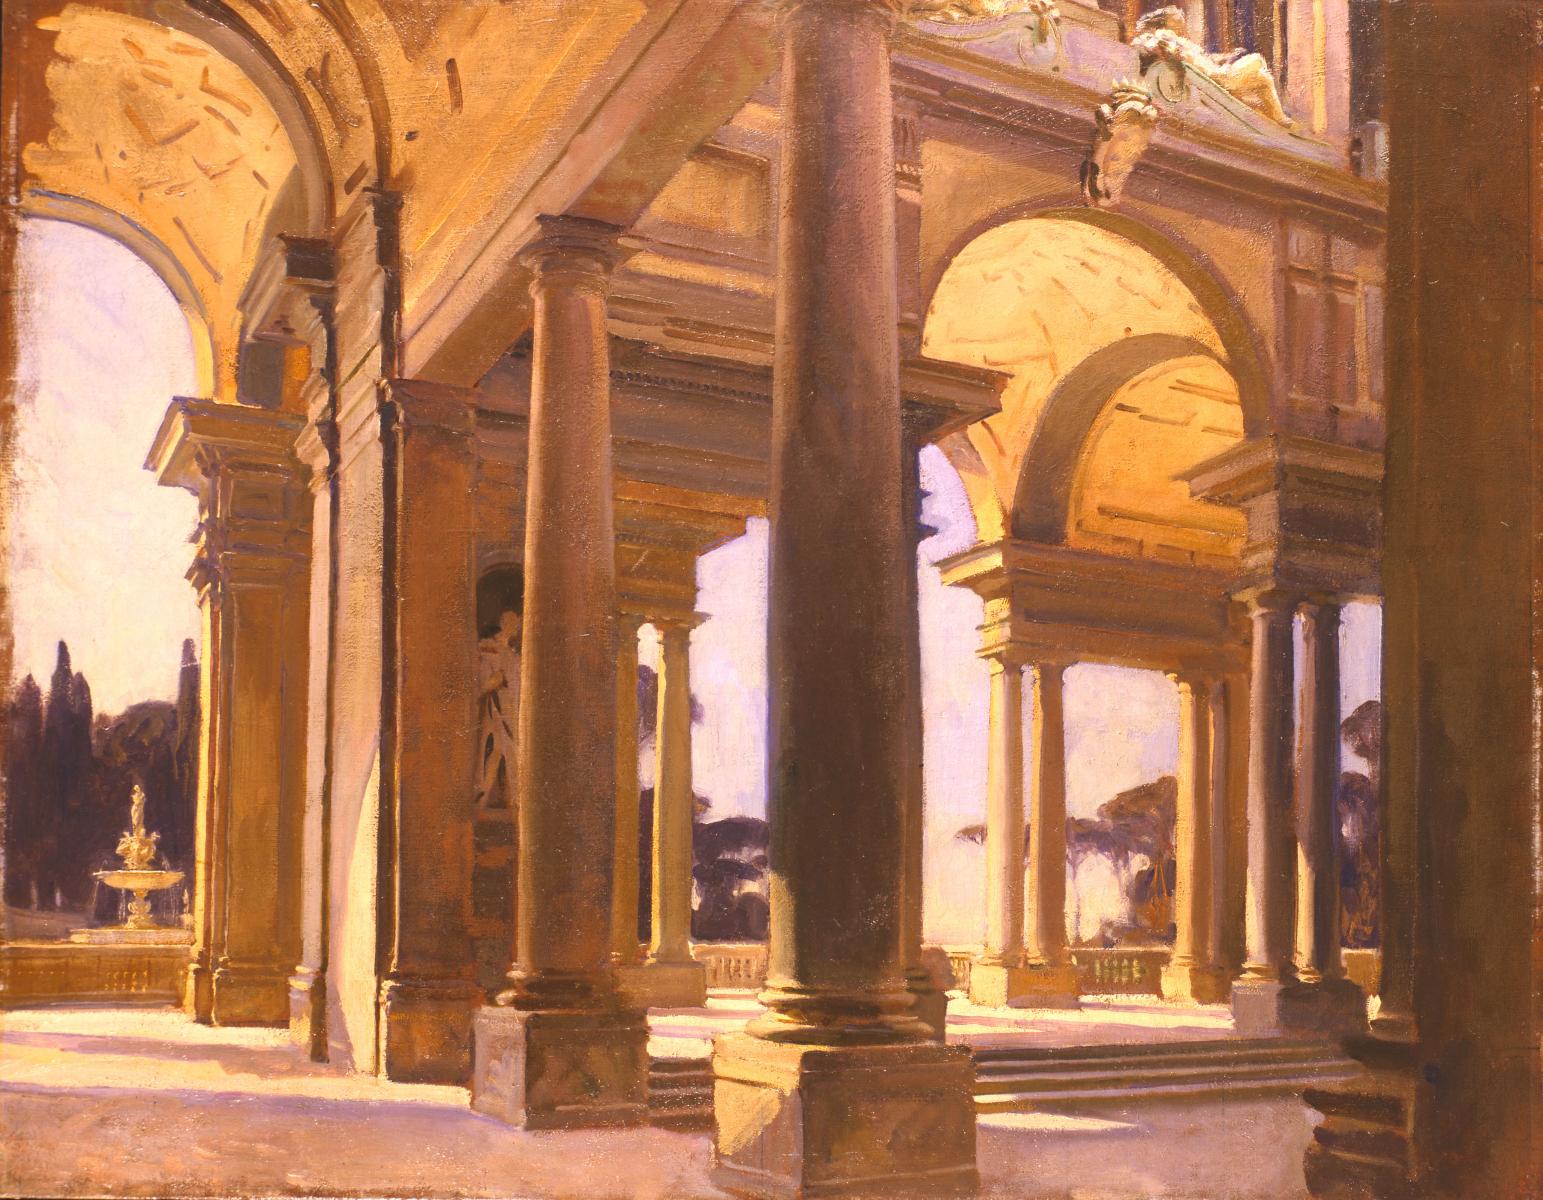 John Singer Sargent, Study of Architecture, Florence, ca. 1910